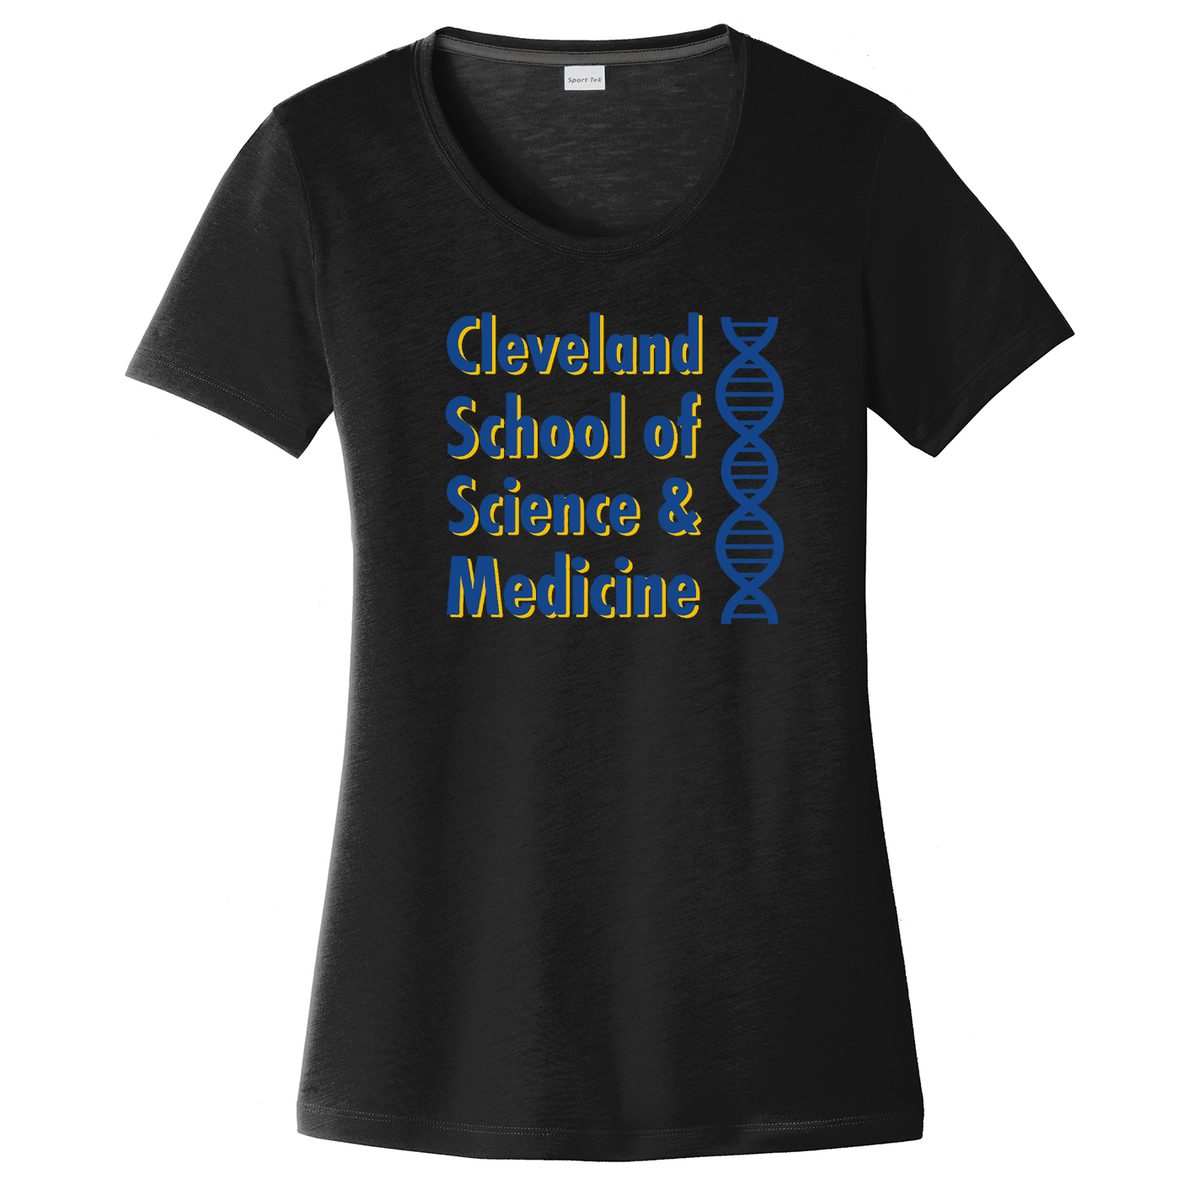 Cleveland School of Science and Medicine Women's CottonTouch Performance T-Shirt